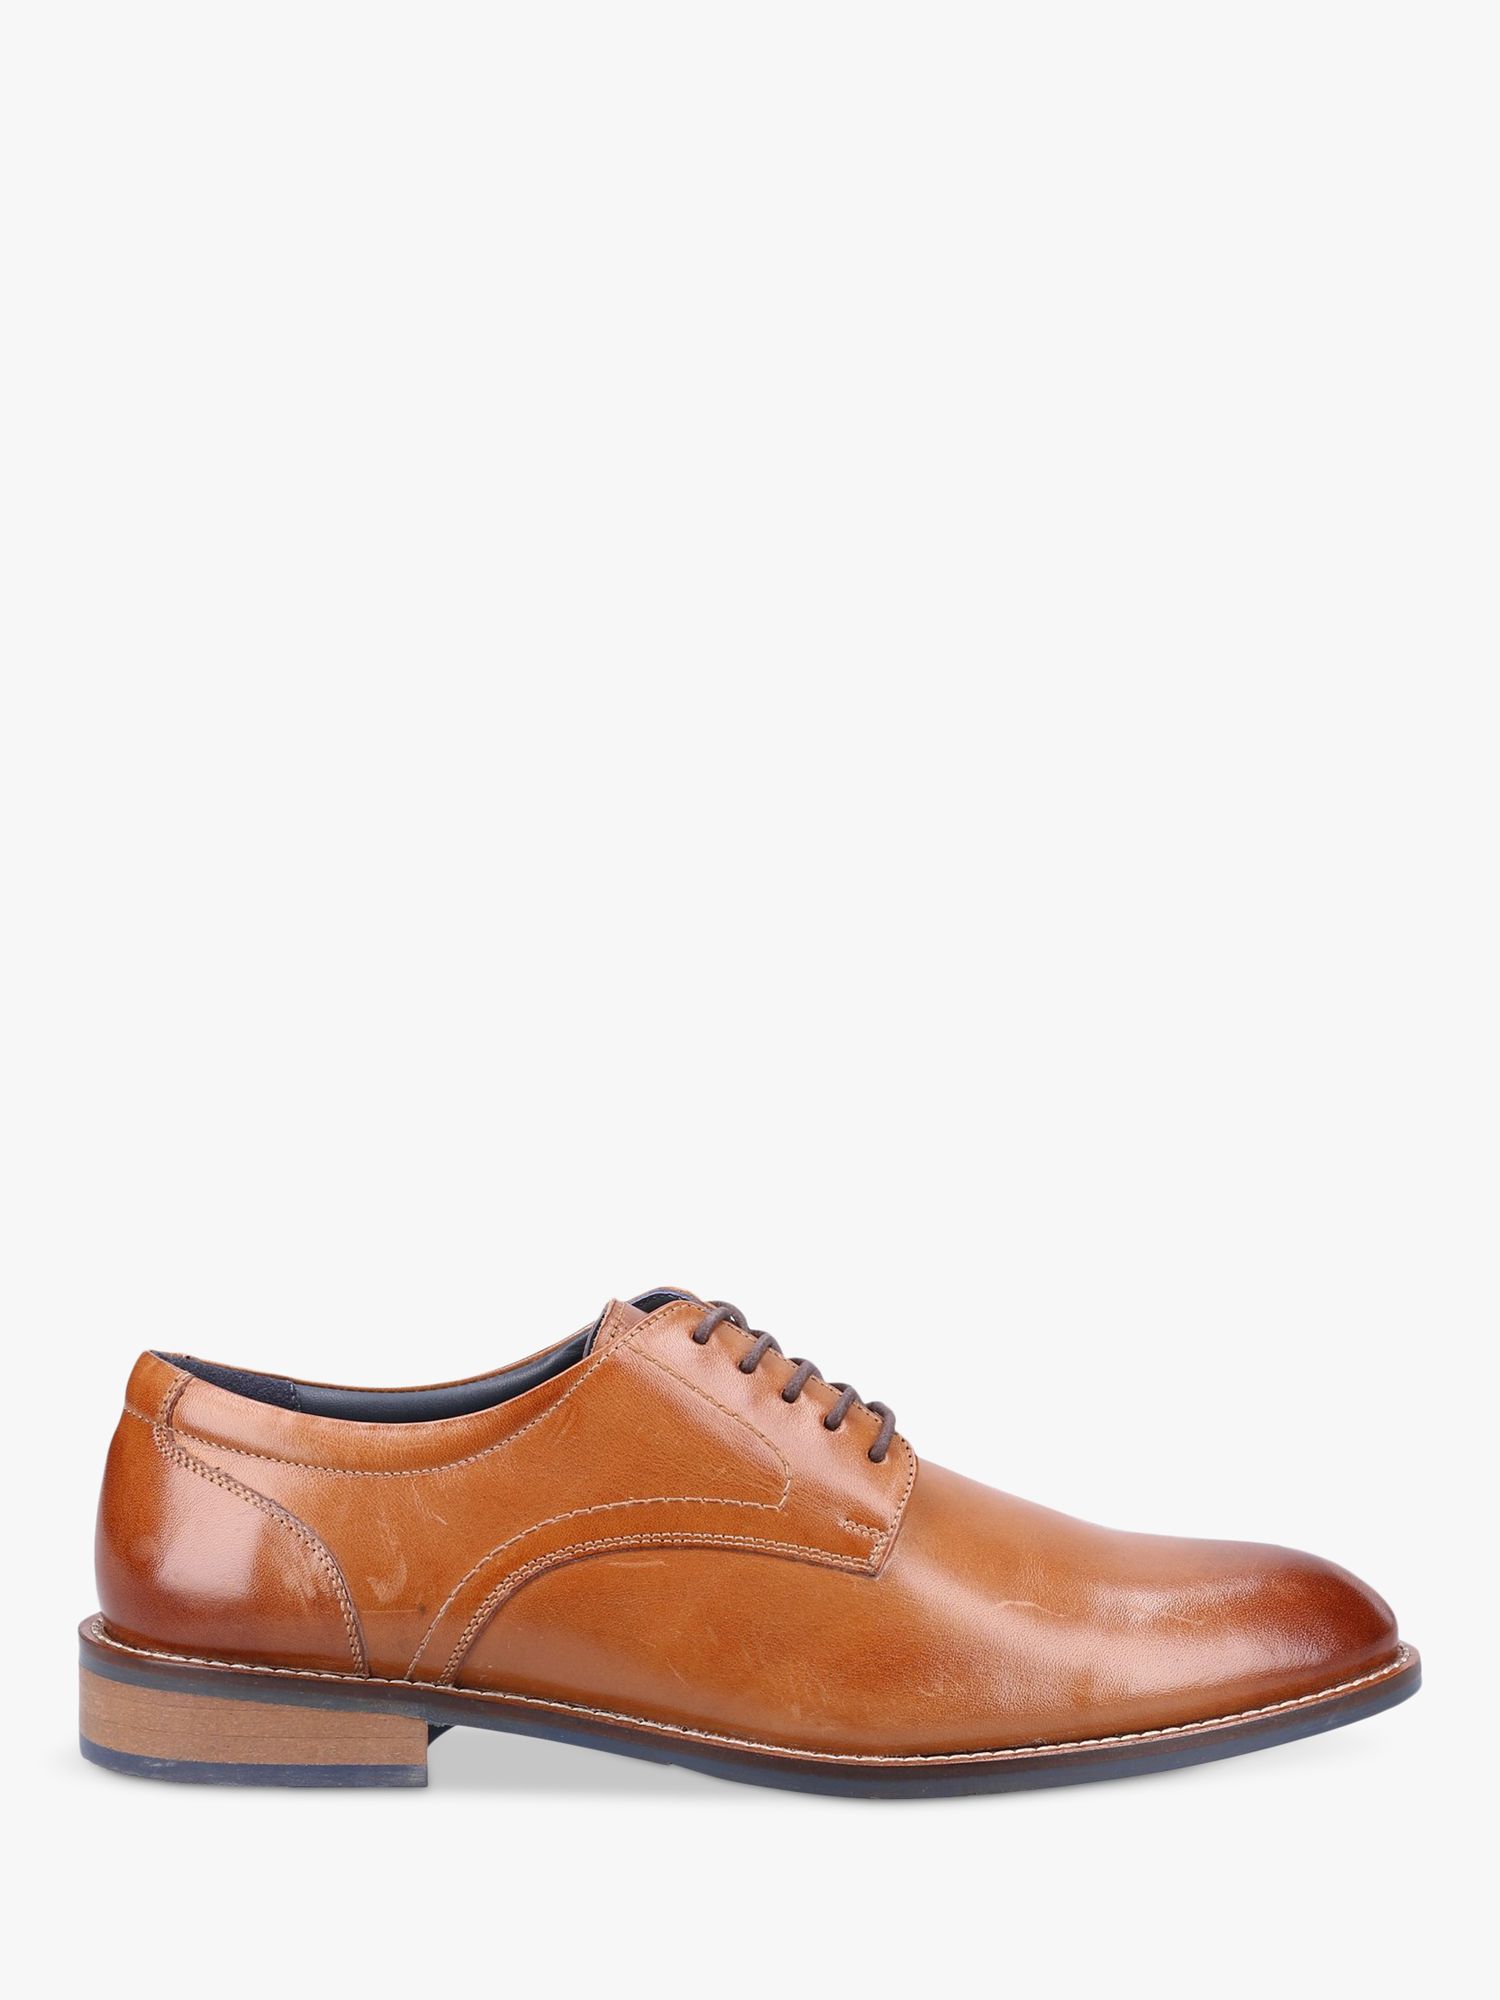 Hush Puppies Damien Leather Derby Shoes, Tan at John Lewis & Partners